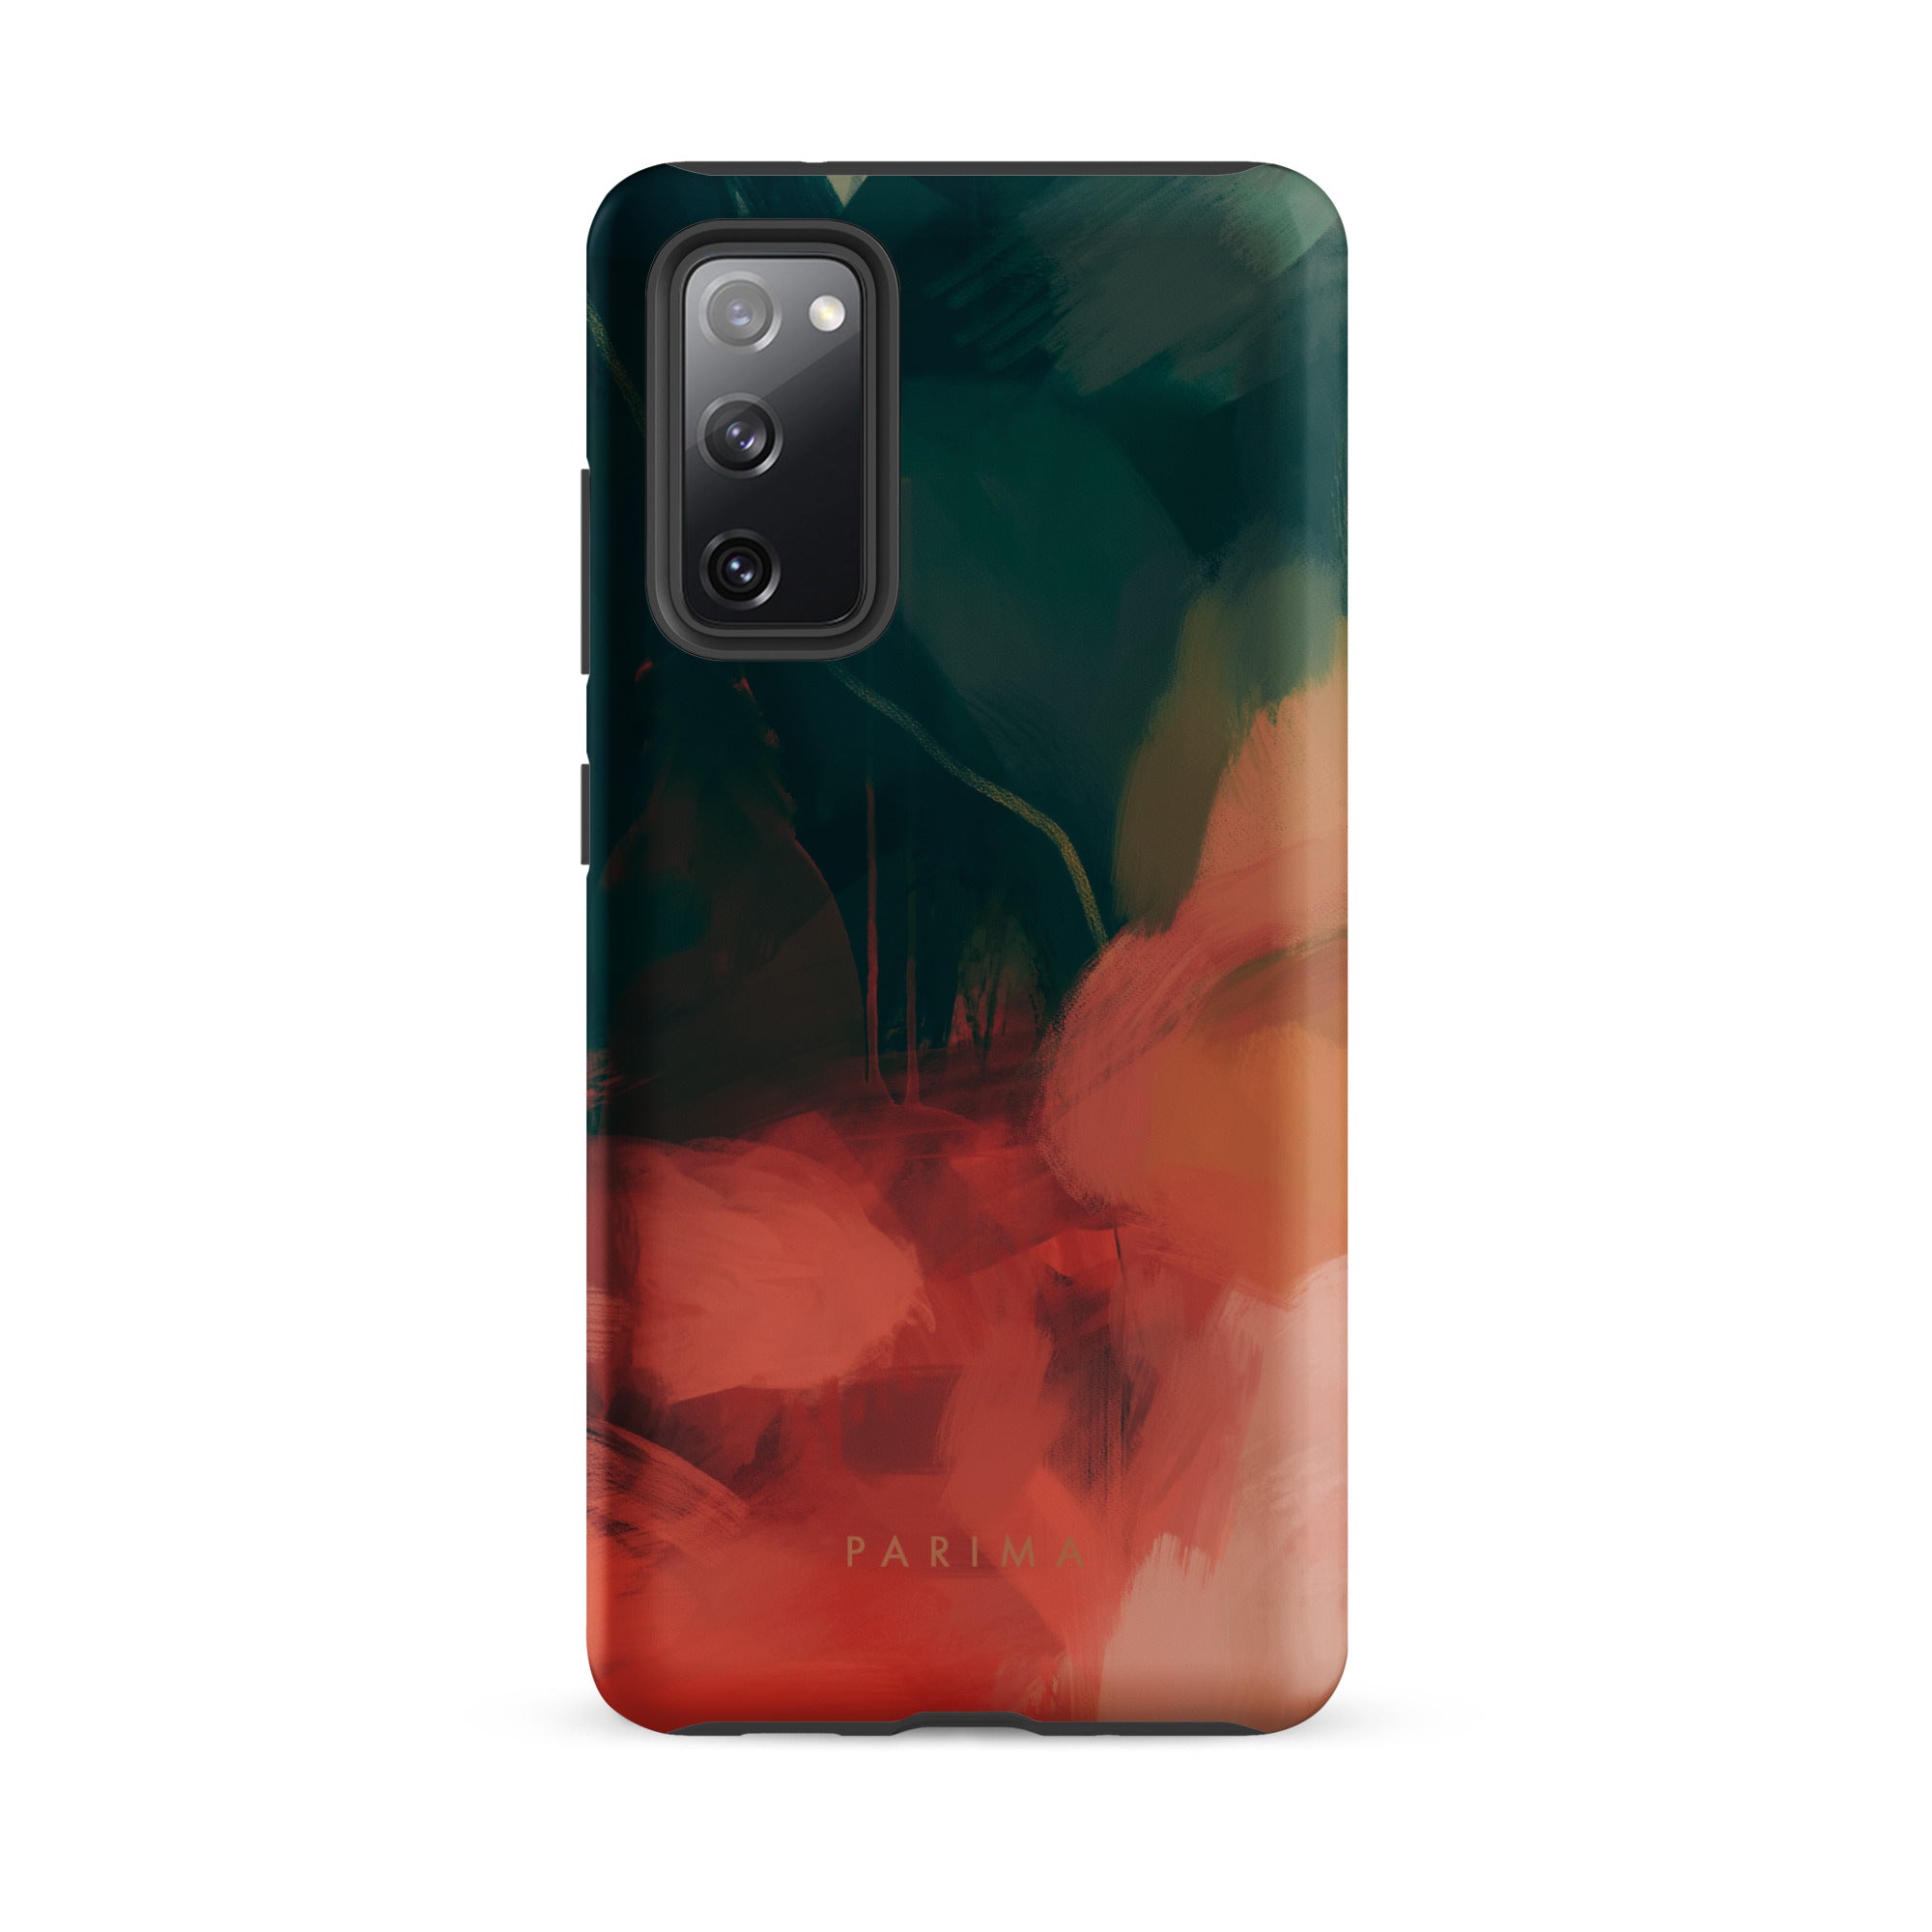 Eventide, green and red abstract art on Samsung Galaxy S20 fe tough case by Parima Studio